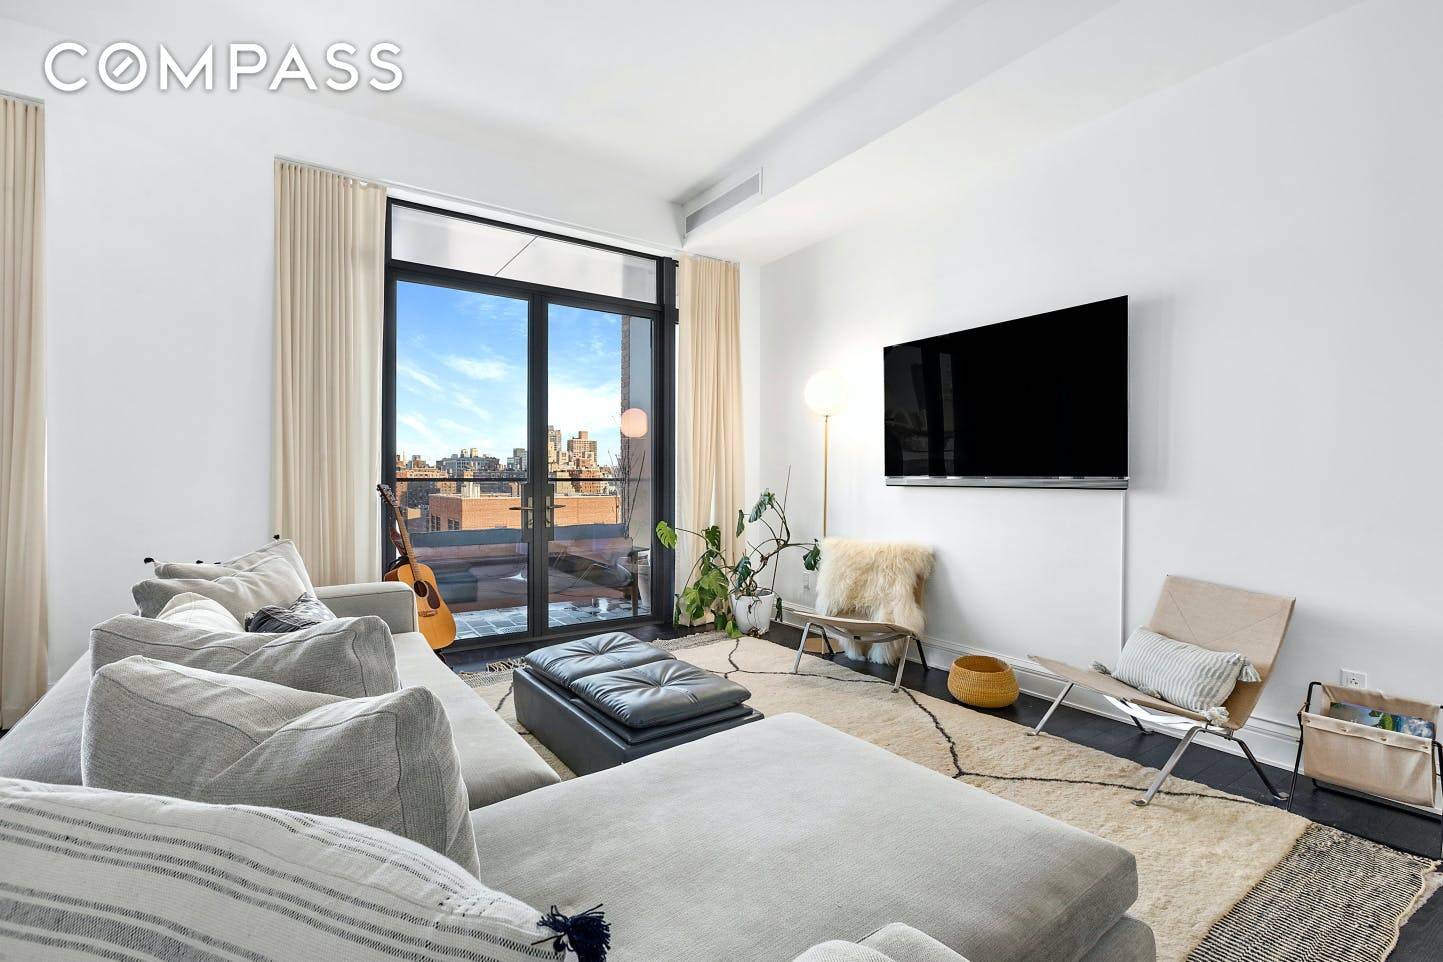 Enjoy glorious sunlight and high floor views in this sprawling three bedroom, three and a half bathroom showplace with private outdoor space in one of the West Village's most celebrated ...